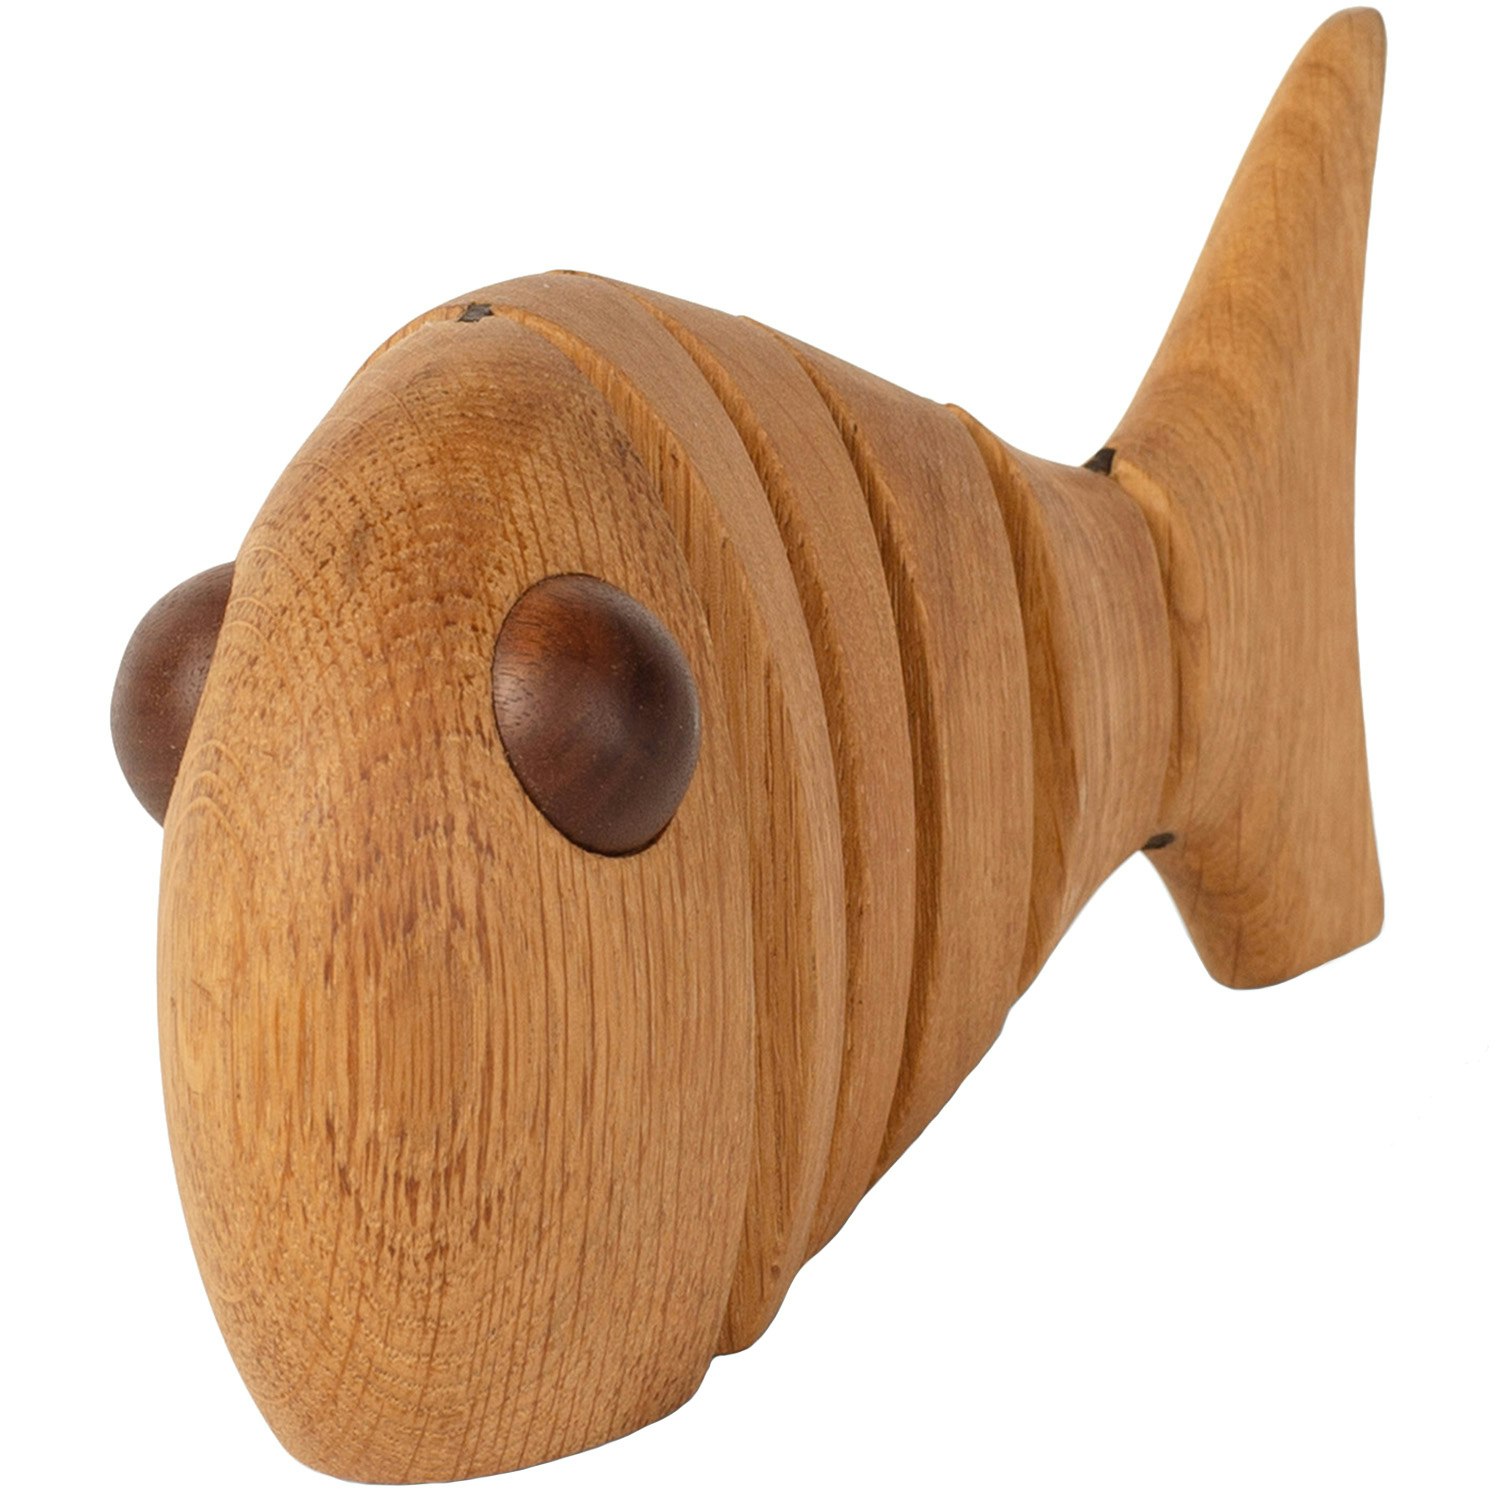 Wooden Fish figurines toys- 11 pieces $104.00